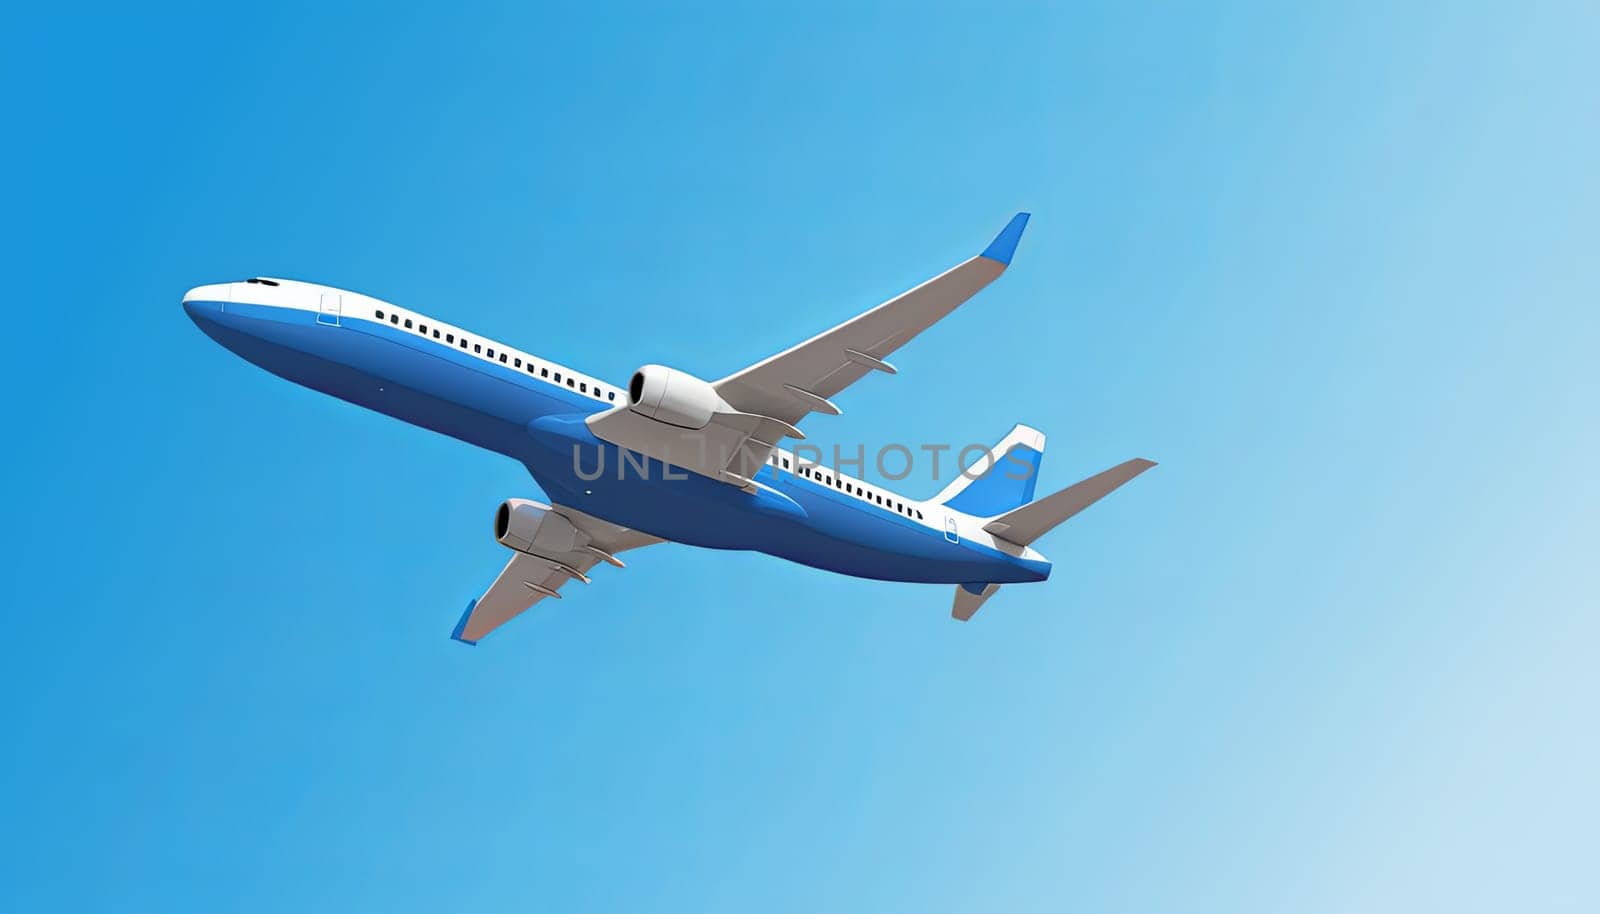 Illustration of a white commercial airplane on a blue background by Andre1ns